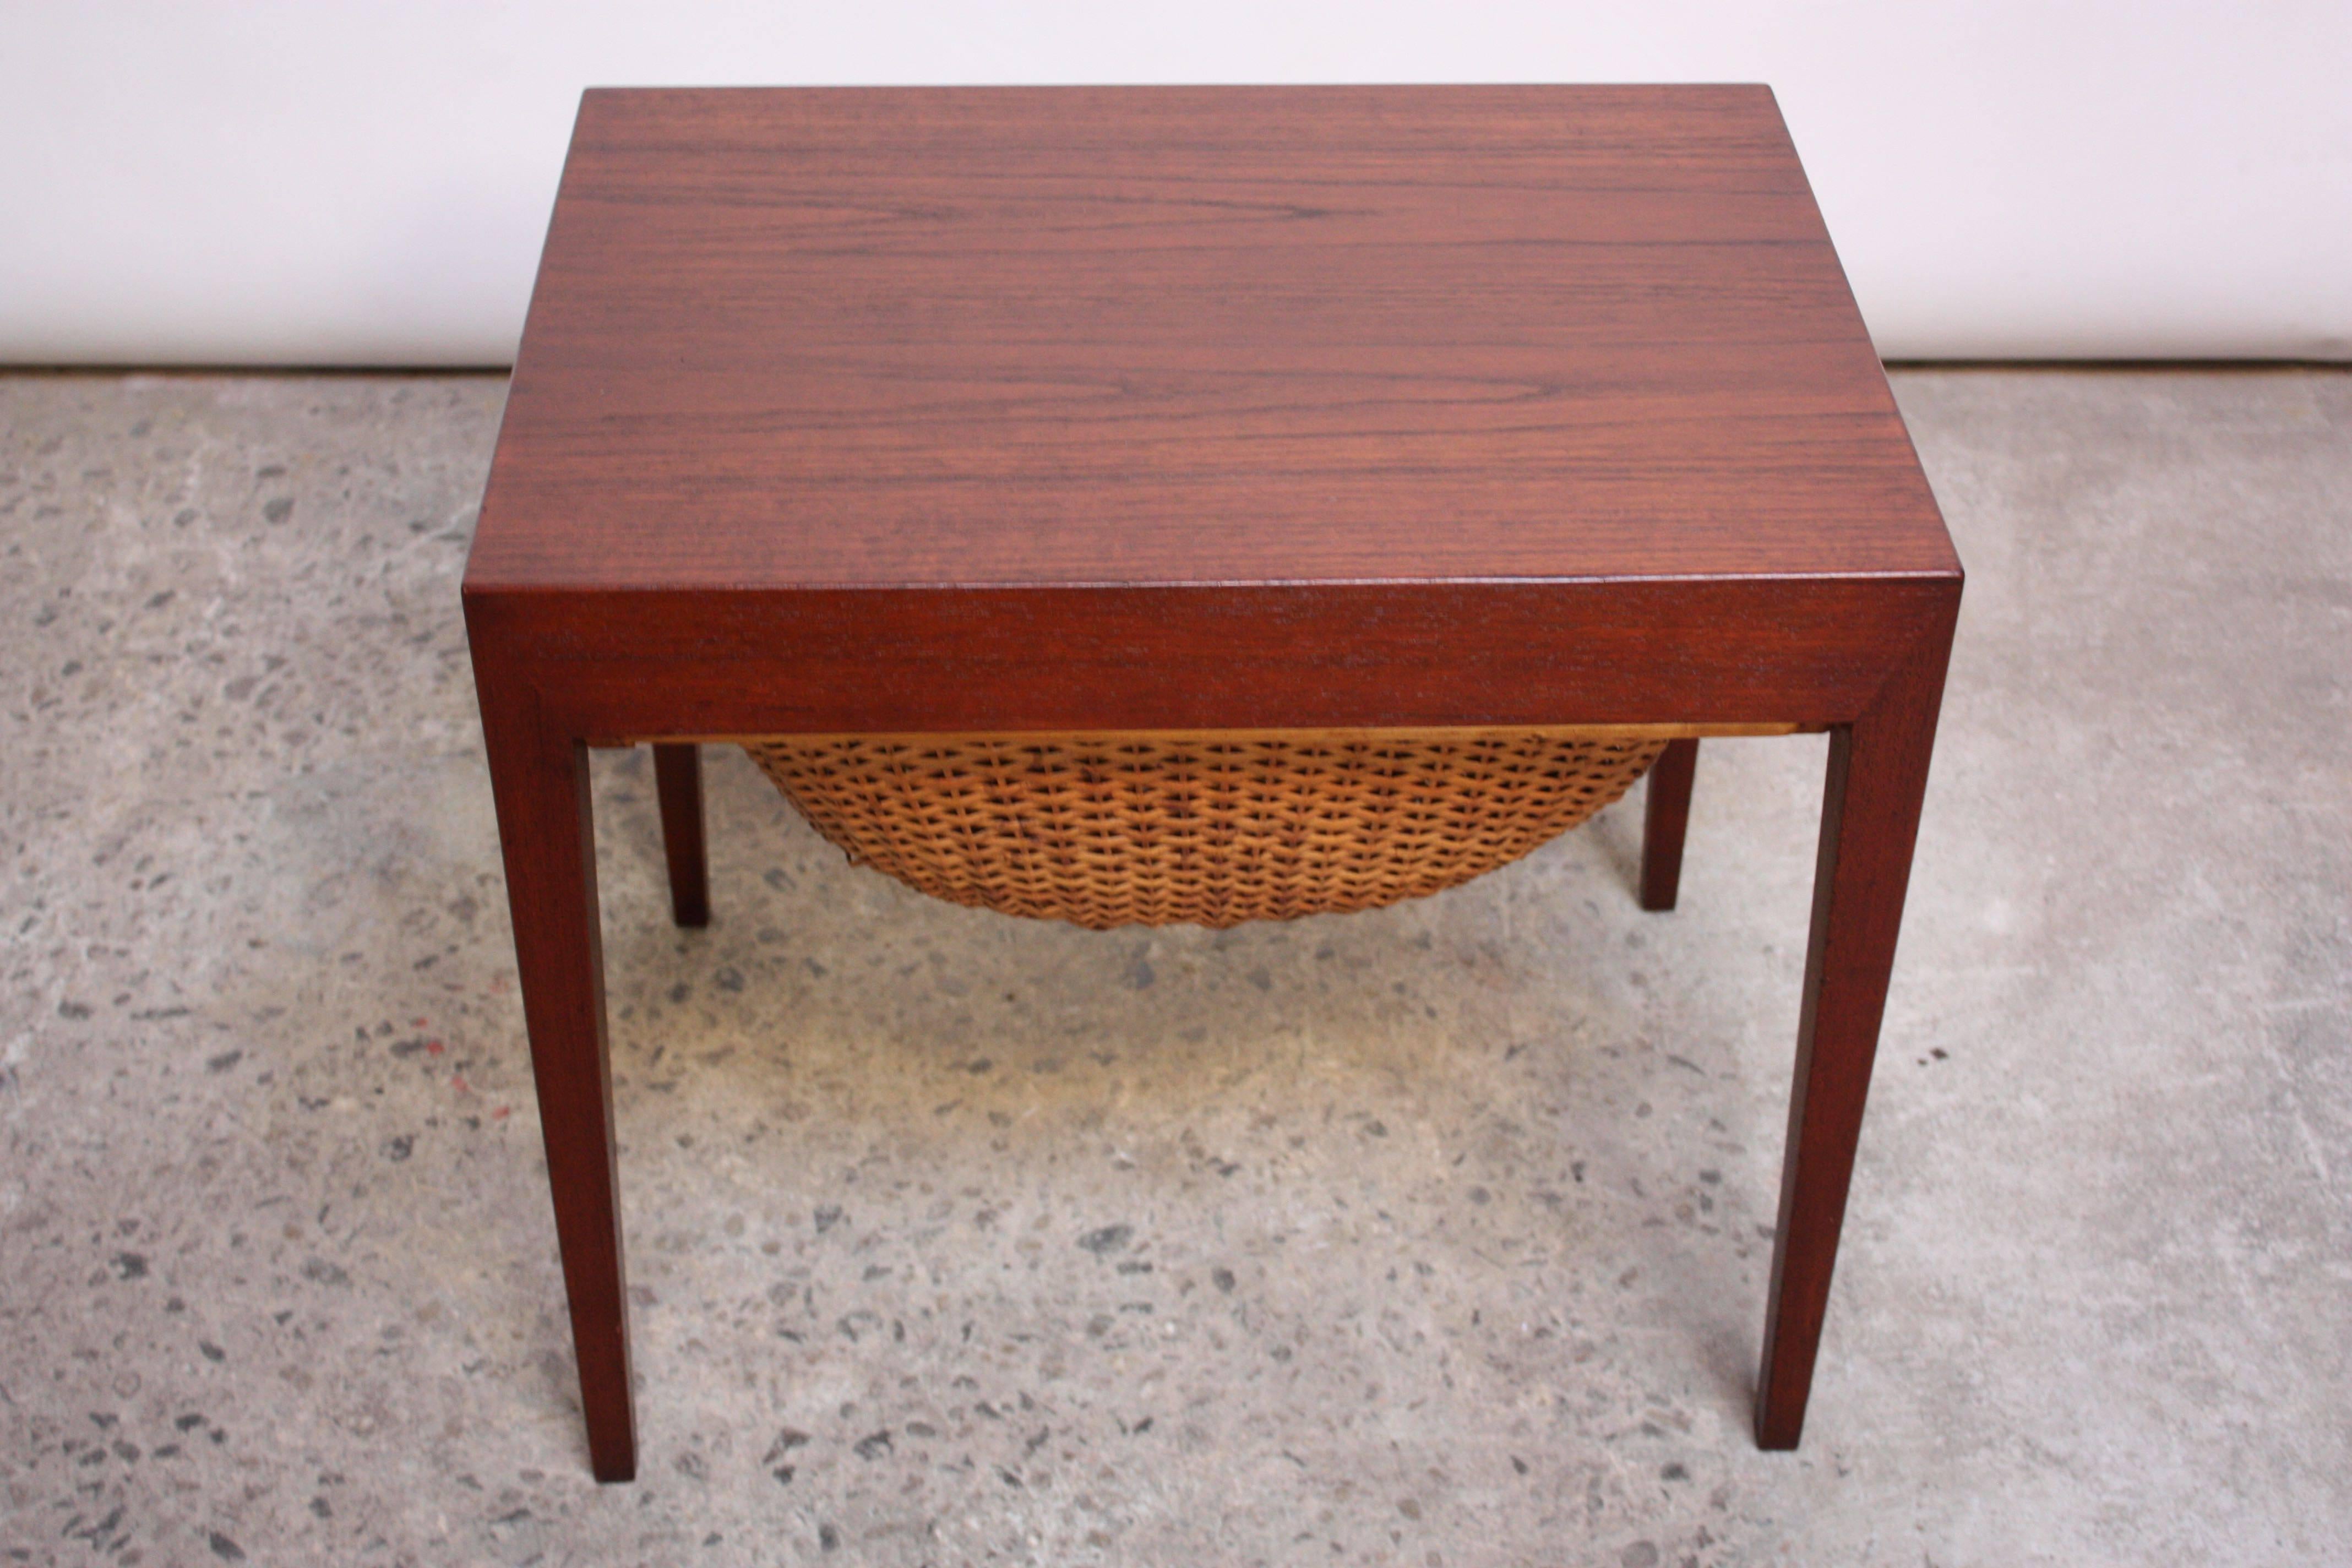 This teak sewing table was designed by Severin Hansen Jr. for Haslev Mobelsnedkeri in the 1960s and is comprised of a woven rattan basket below a shallow, hidden drawer, fitted for sewing implements (including a built-in pin-cushion). Although the